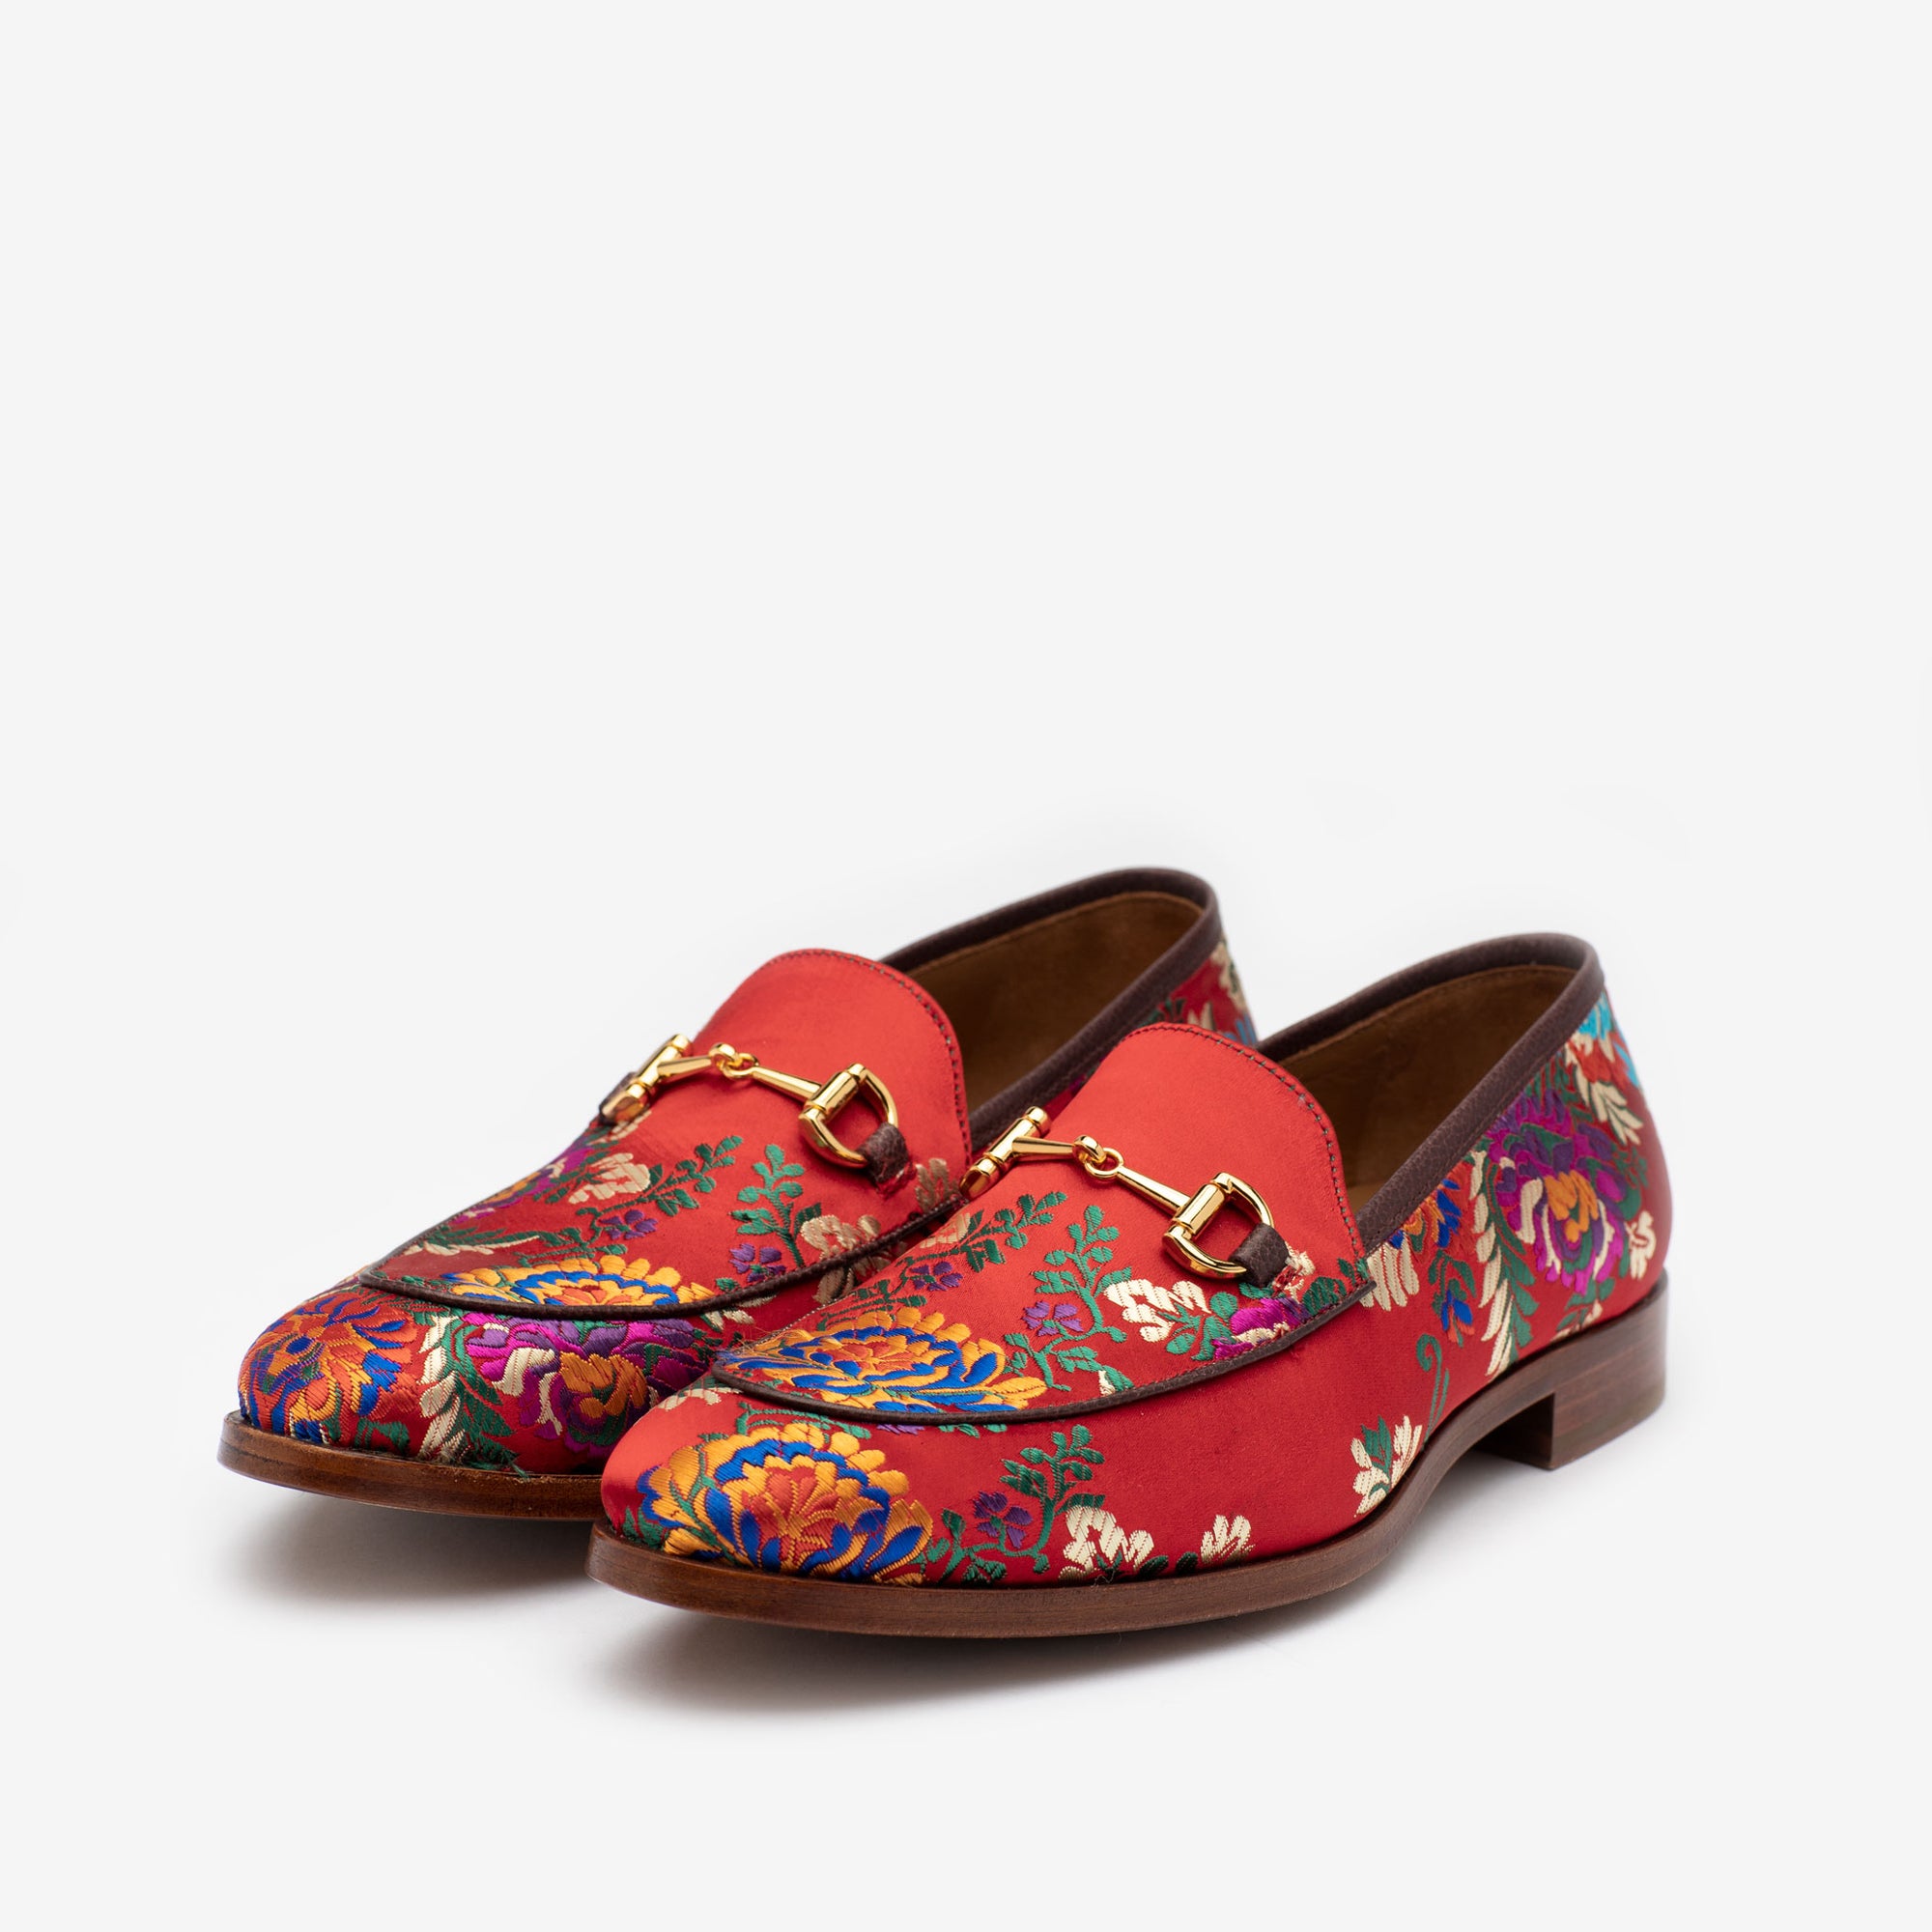 Russell loafer in fiore side profile {{rollover}}